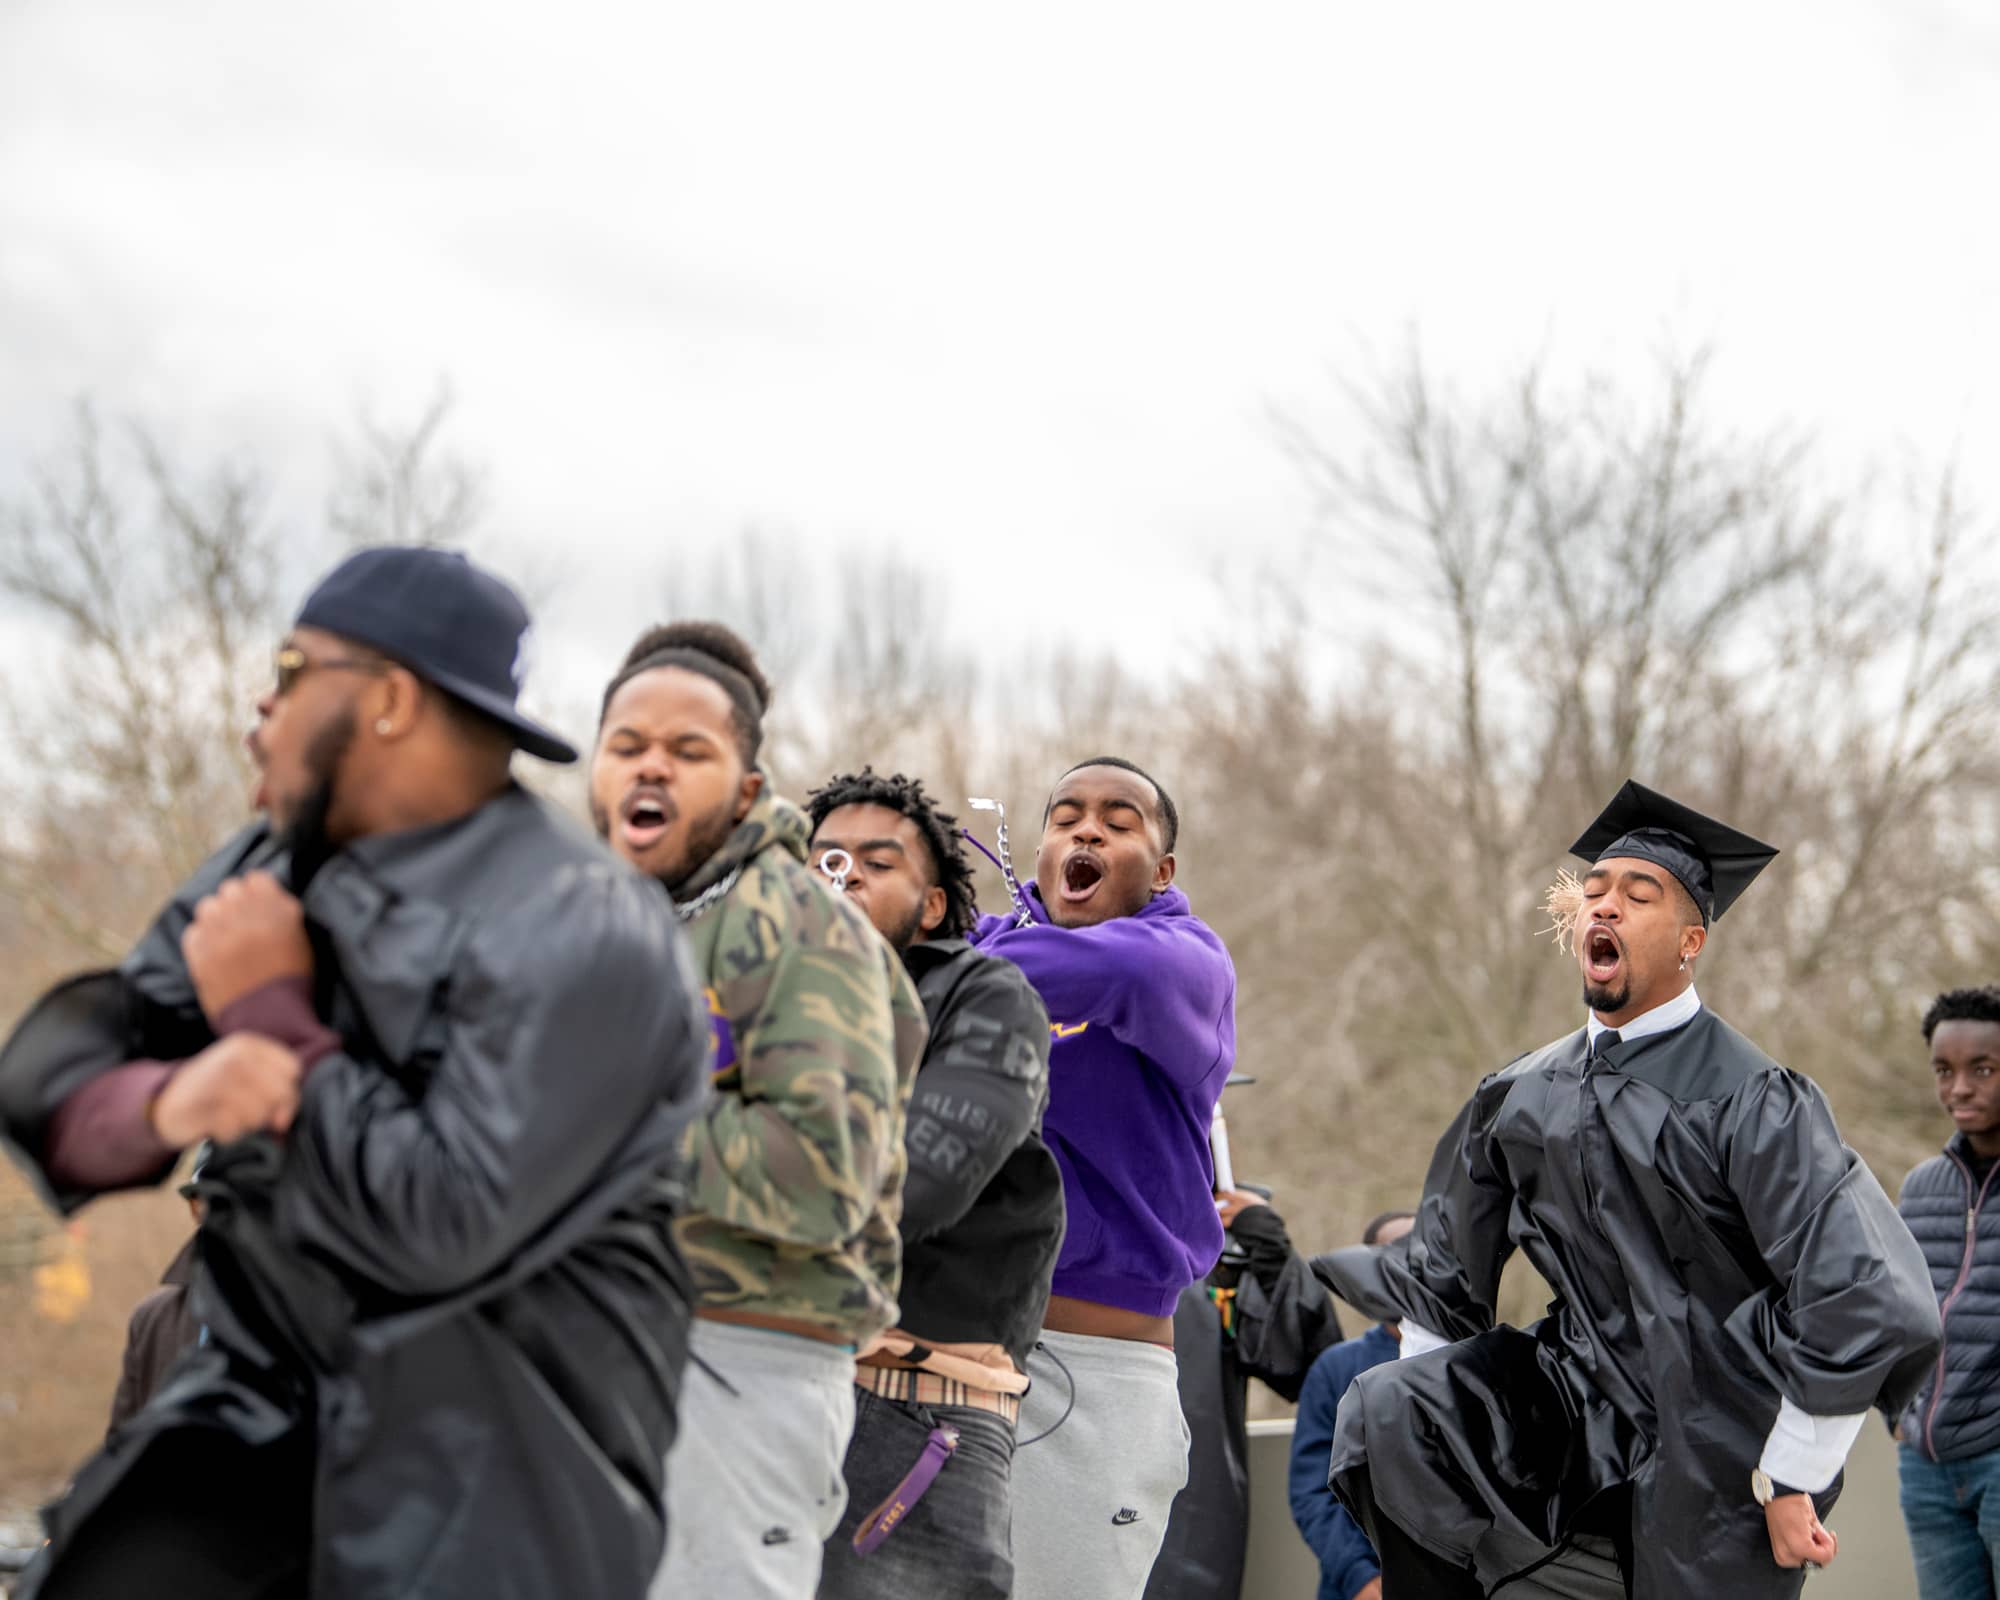 Fraternity members celebrate with one another after the Fall Commencement 2021 at the Athens Campus.